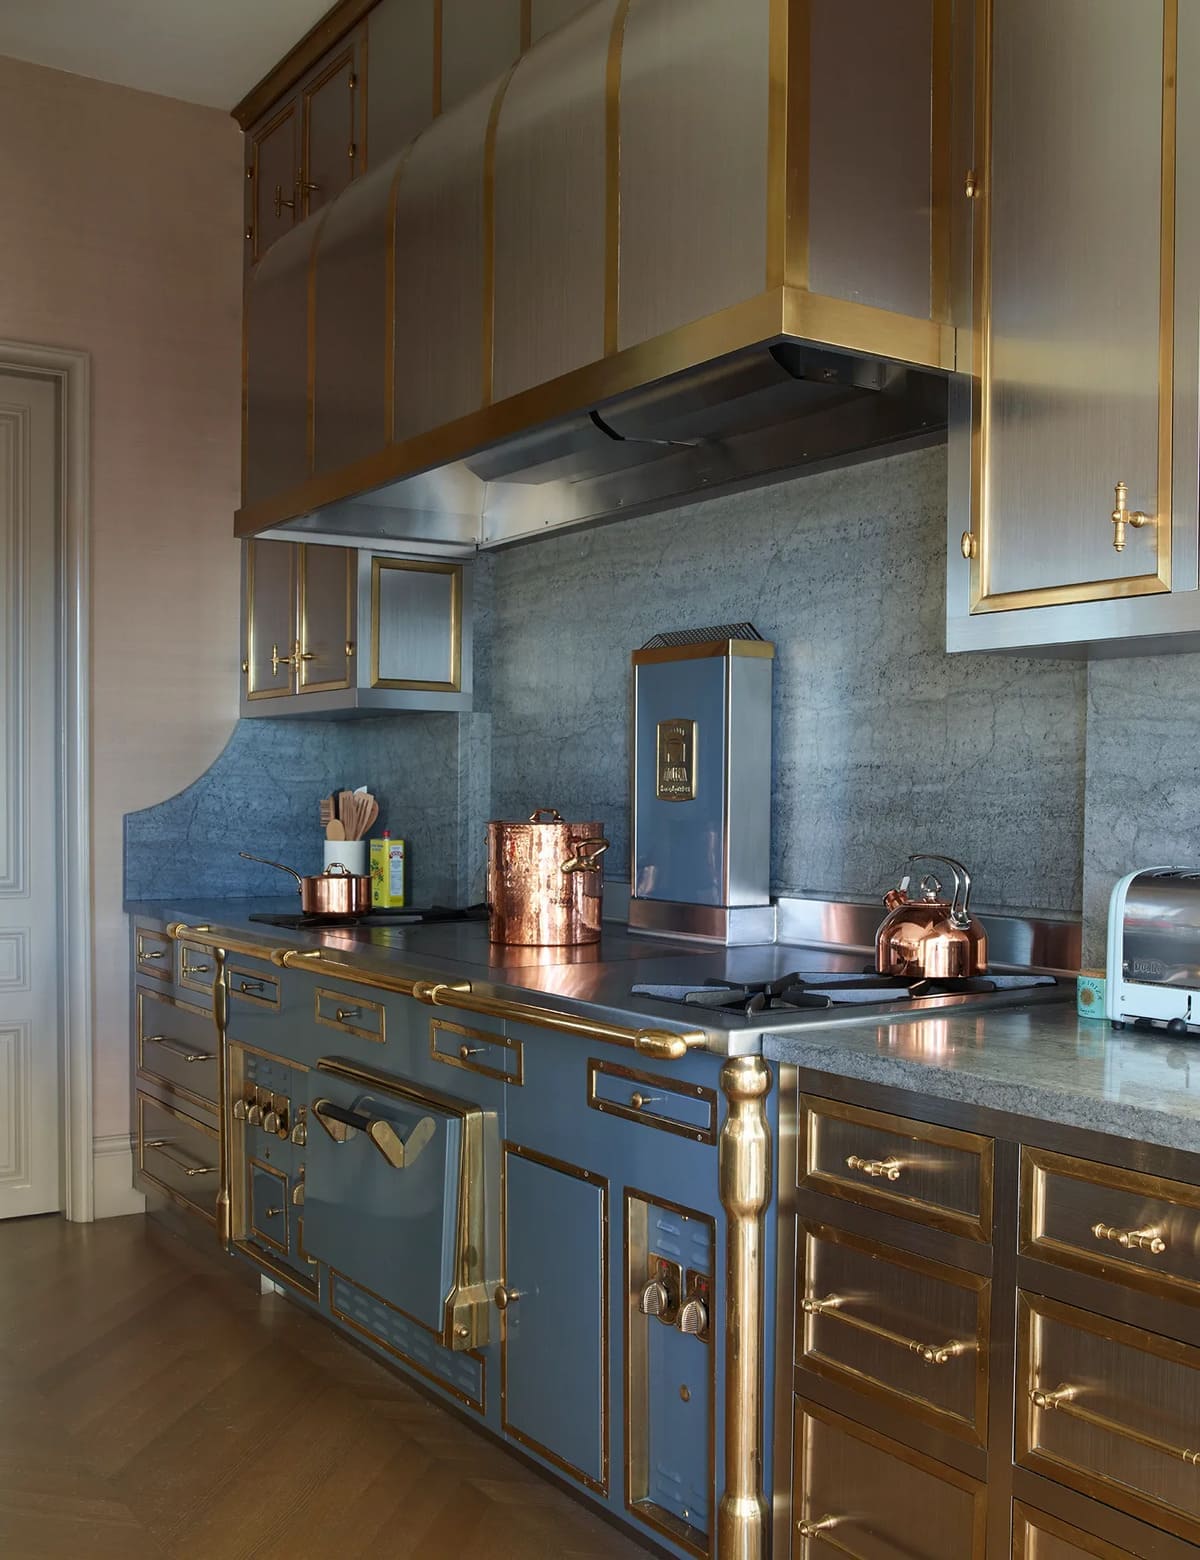 vintage-style kitchen with golden cabinets